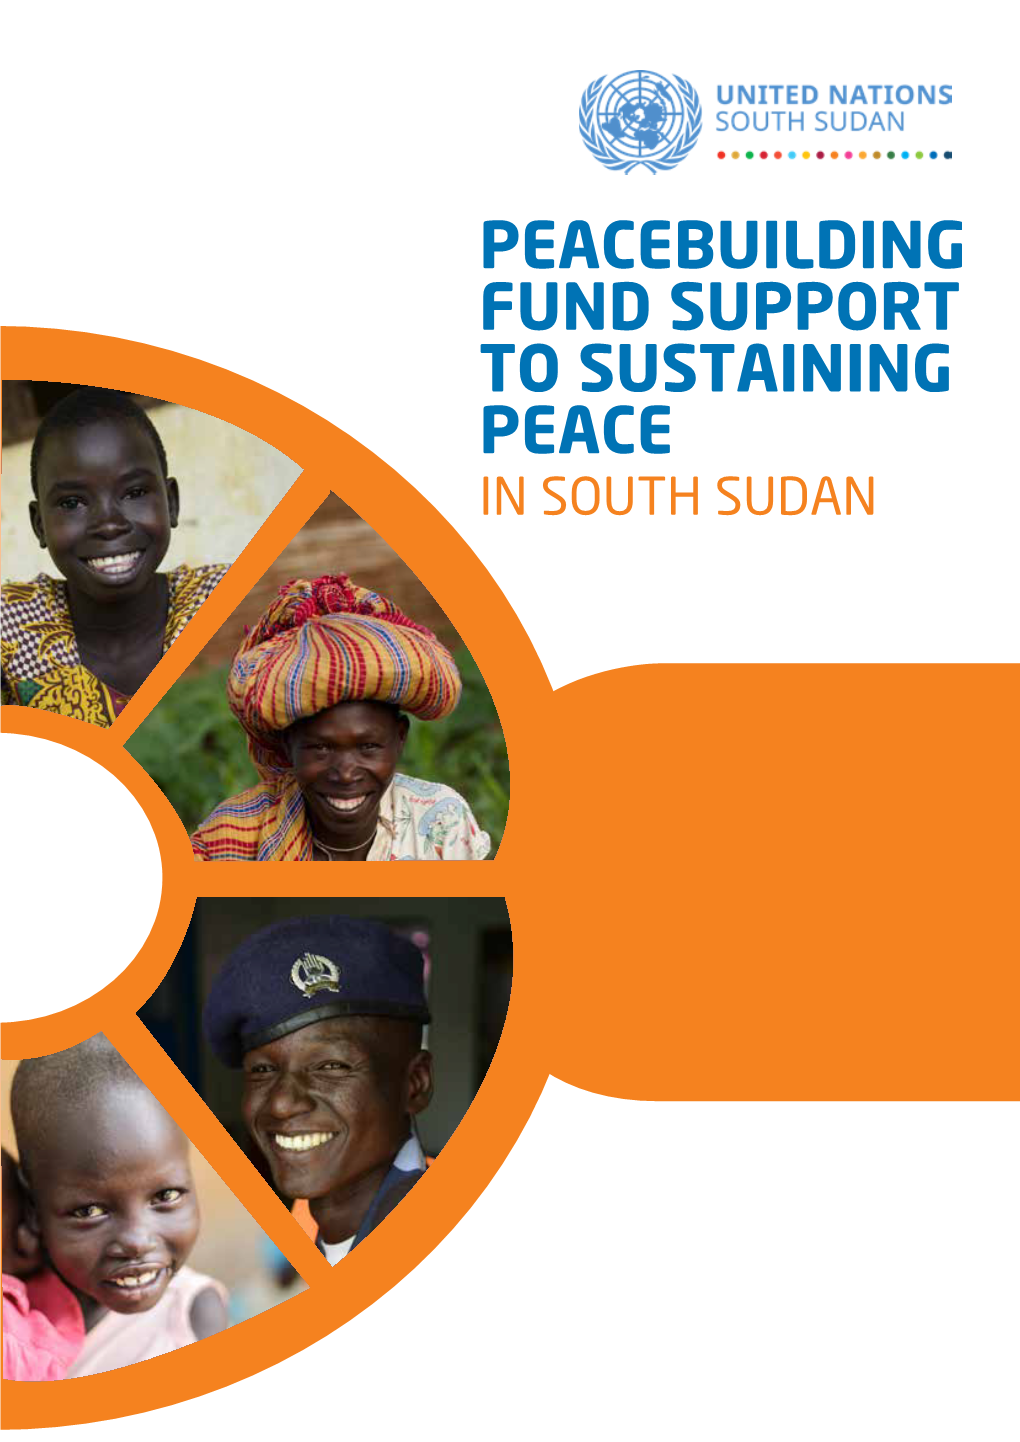 Peacebuilding Fund Support to Sustaining Peace in South Sudan Overview